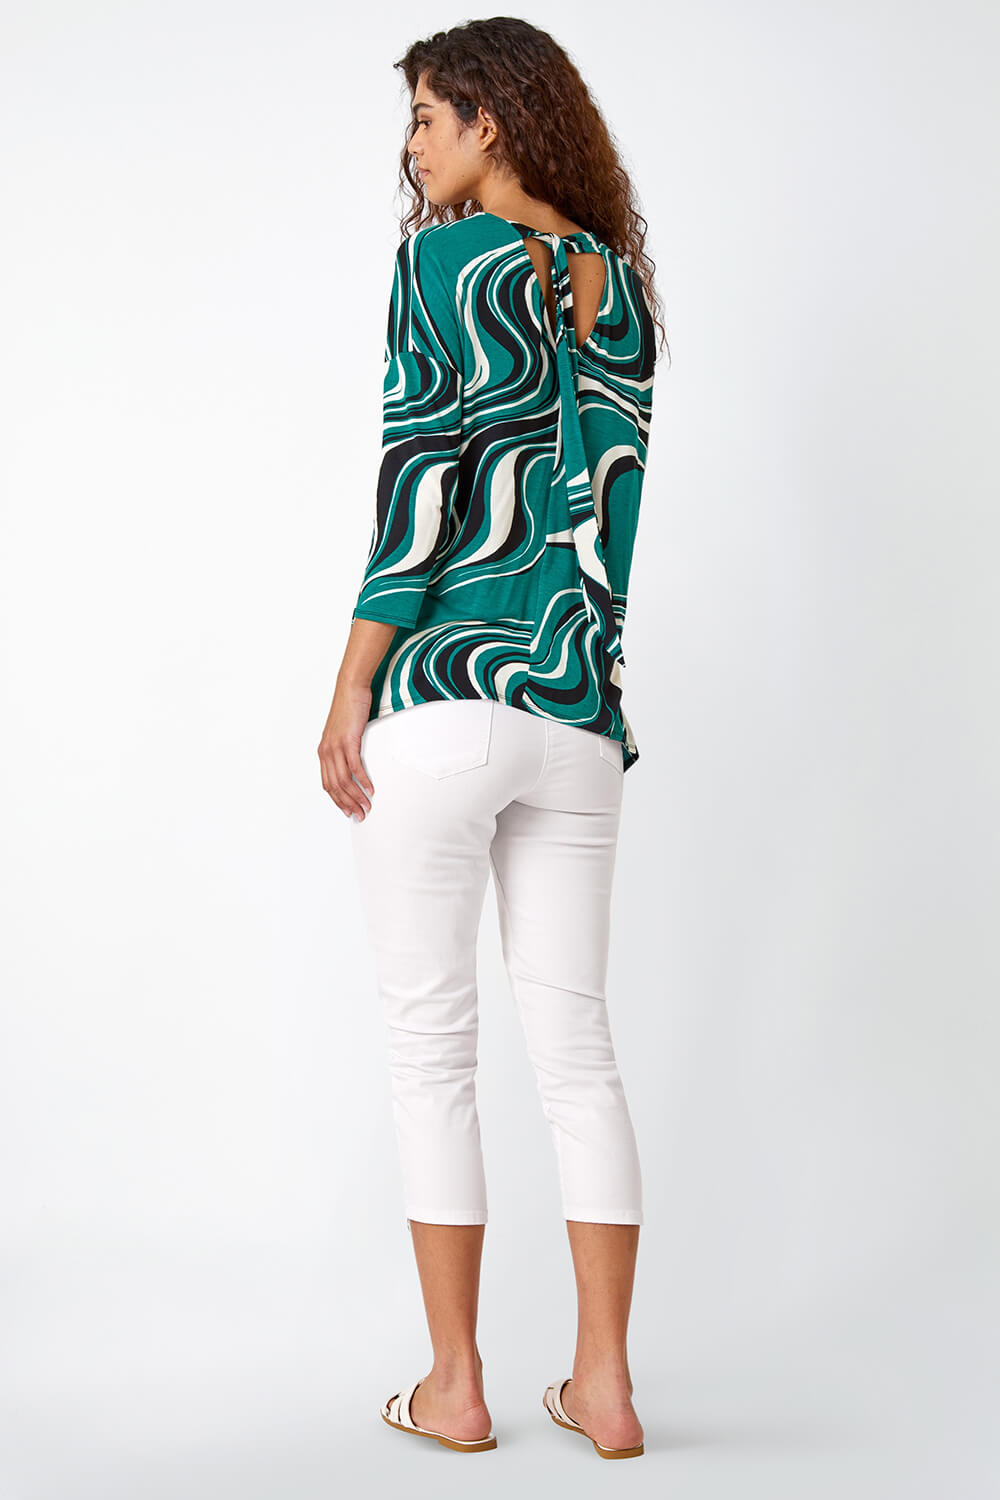 Green Swirl Print Tie Back Stretch Top, Image 4 of 5